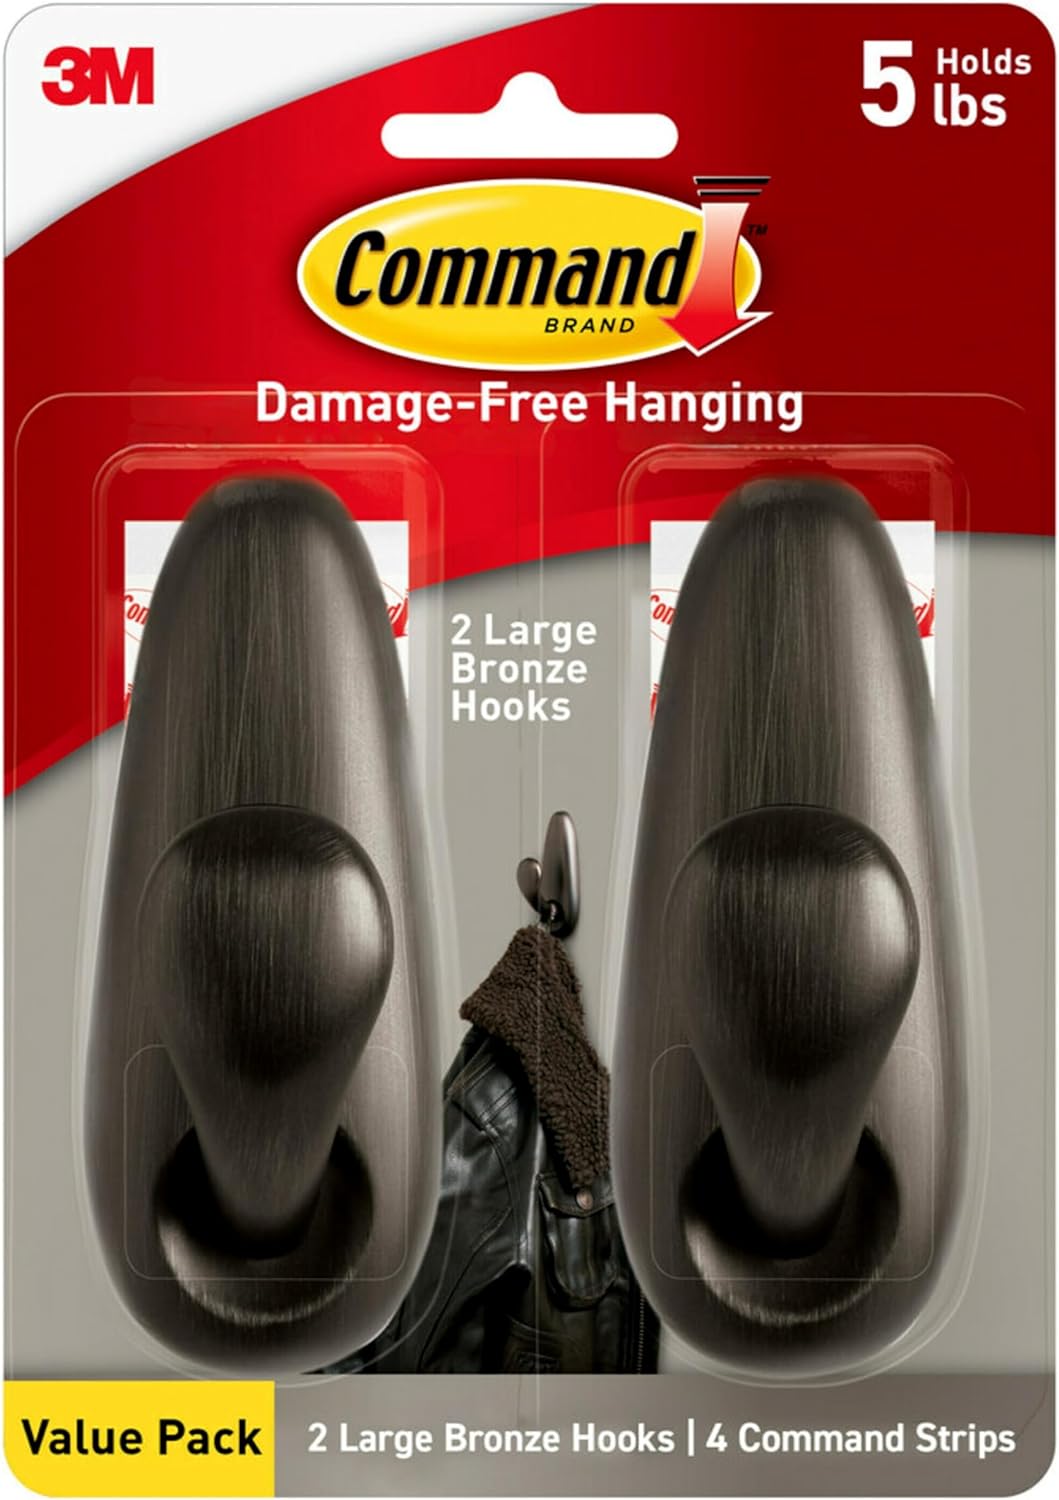 3M Command Forever Classic Large Metal Wall Hooks (2 Hooks + 4 Command Strips, Bronze) $8.50 + Free S&H w/ Prime